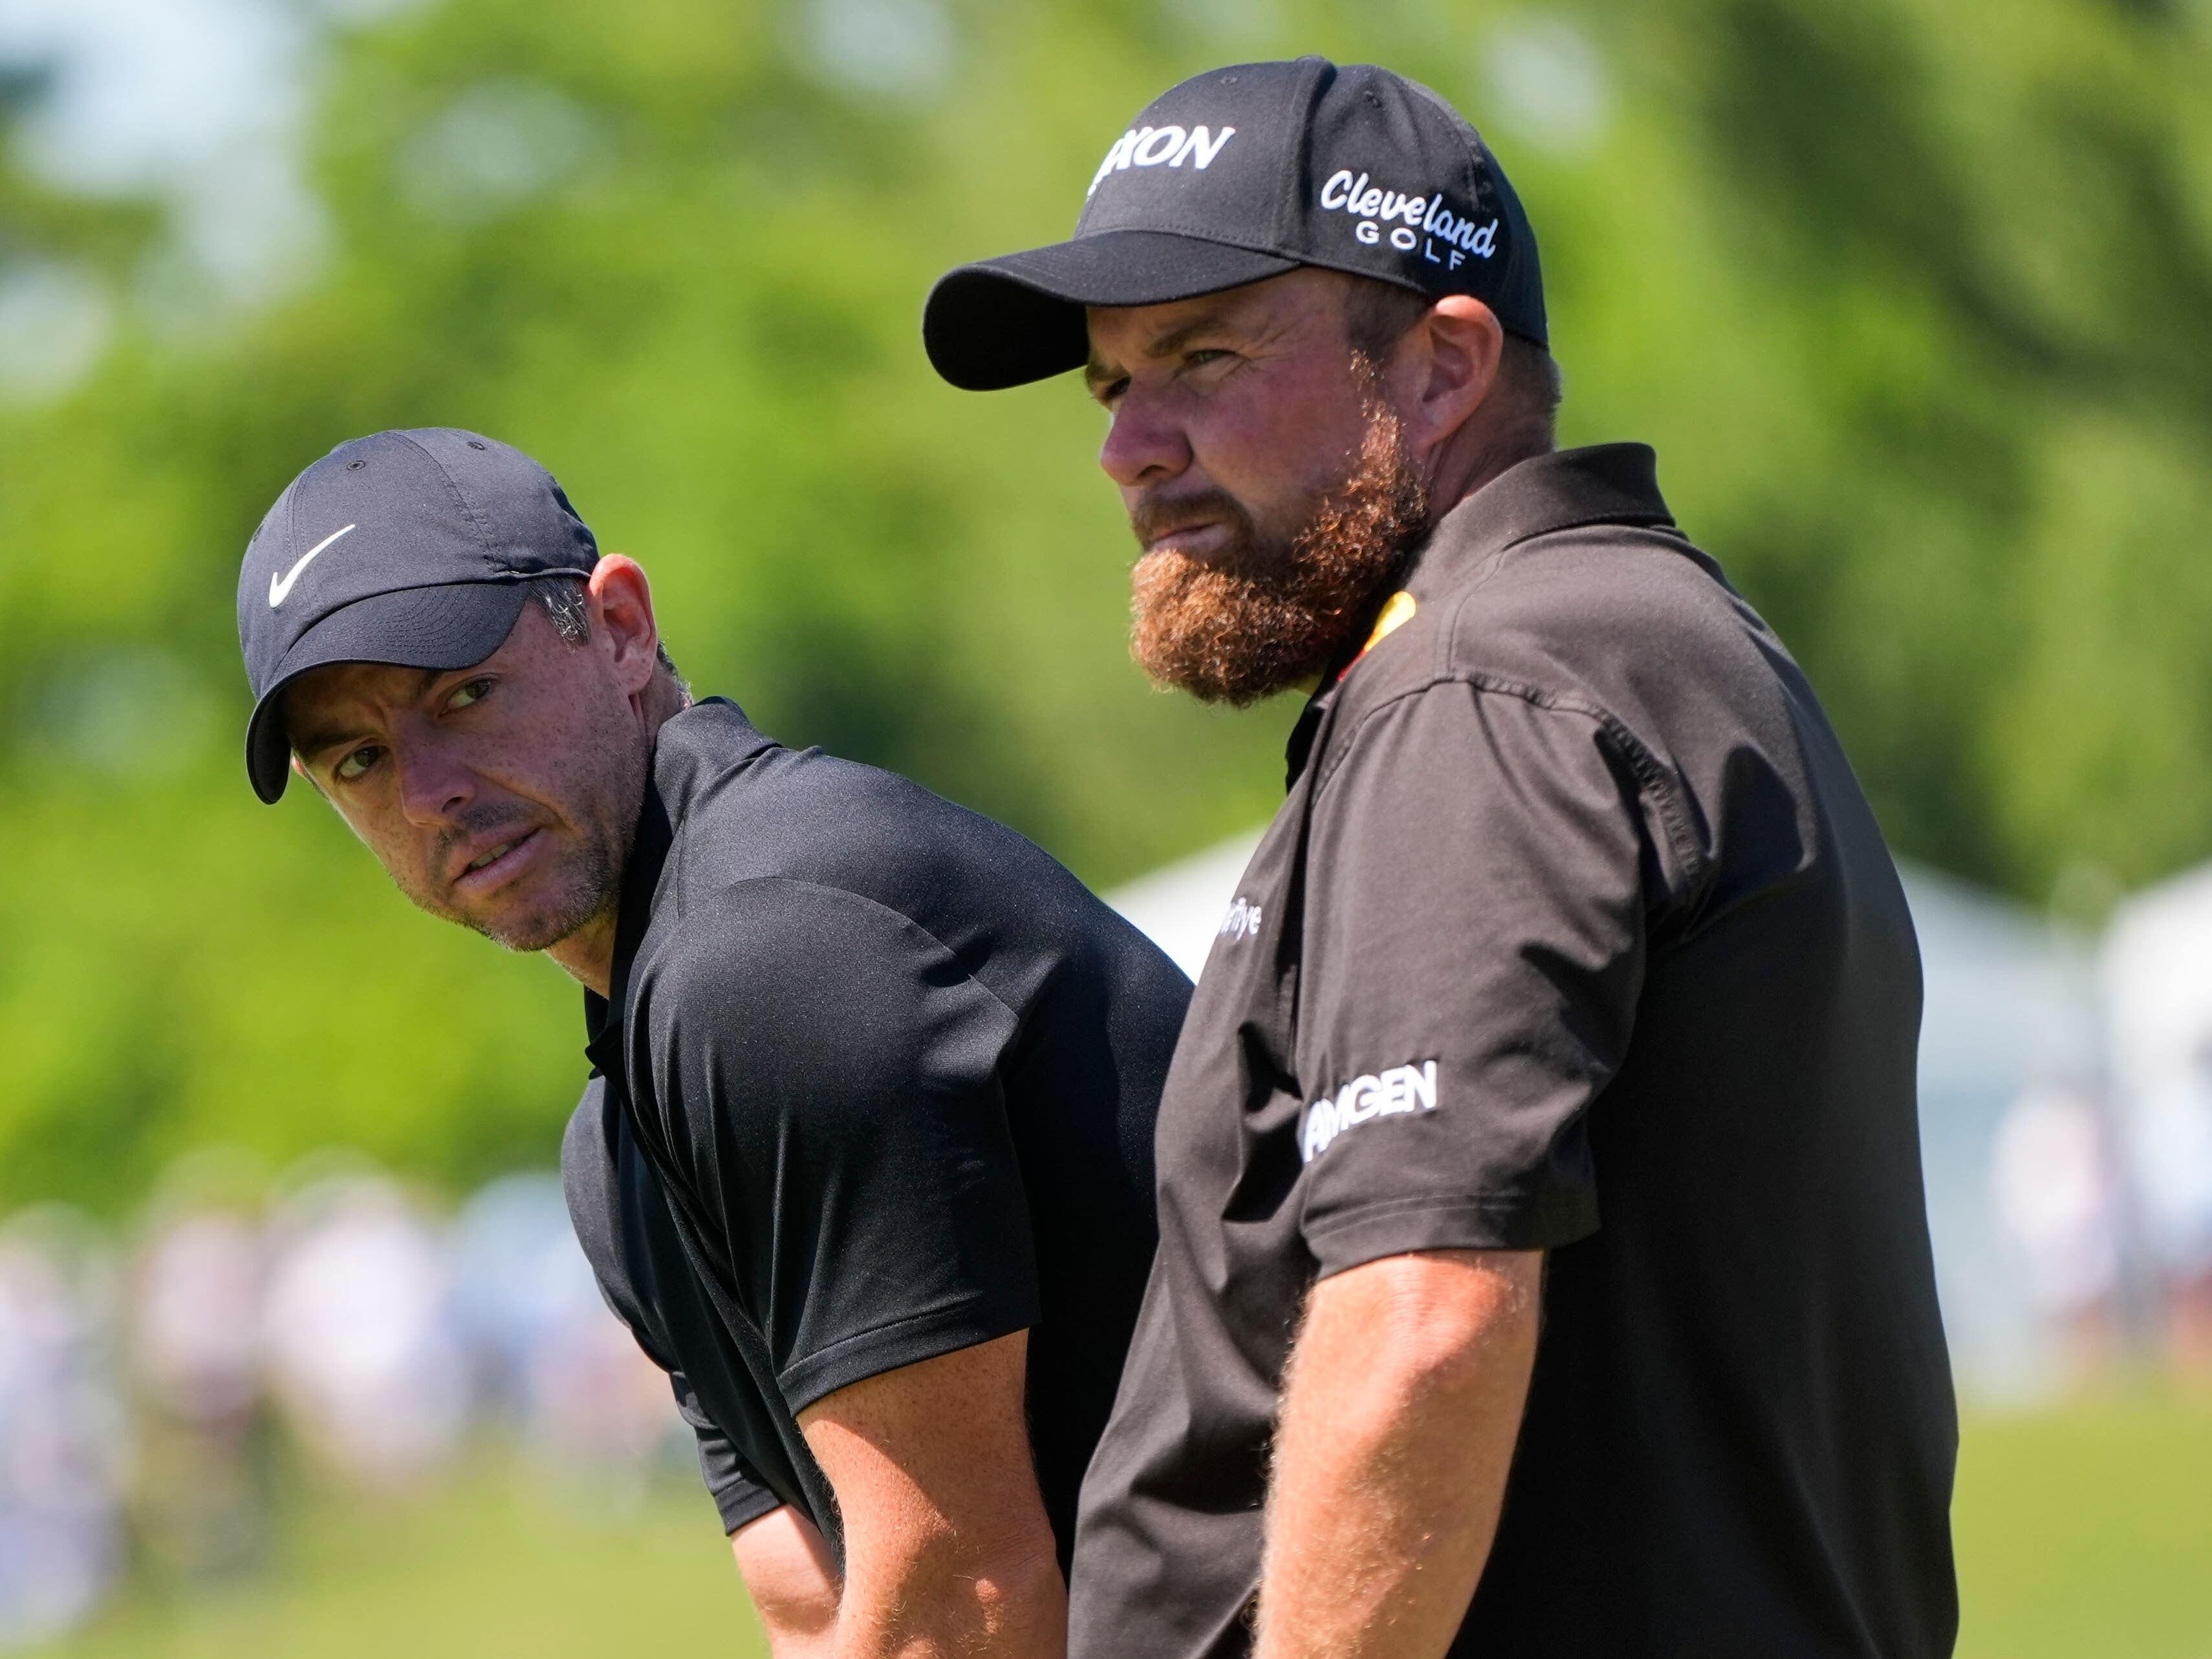 Rory McIlroy and Shane Lowry win Zurich Classic of New Orleans after play-off